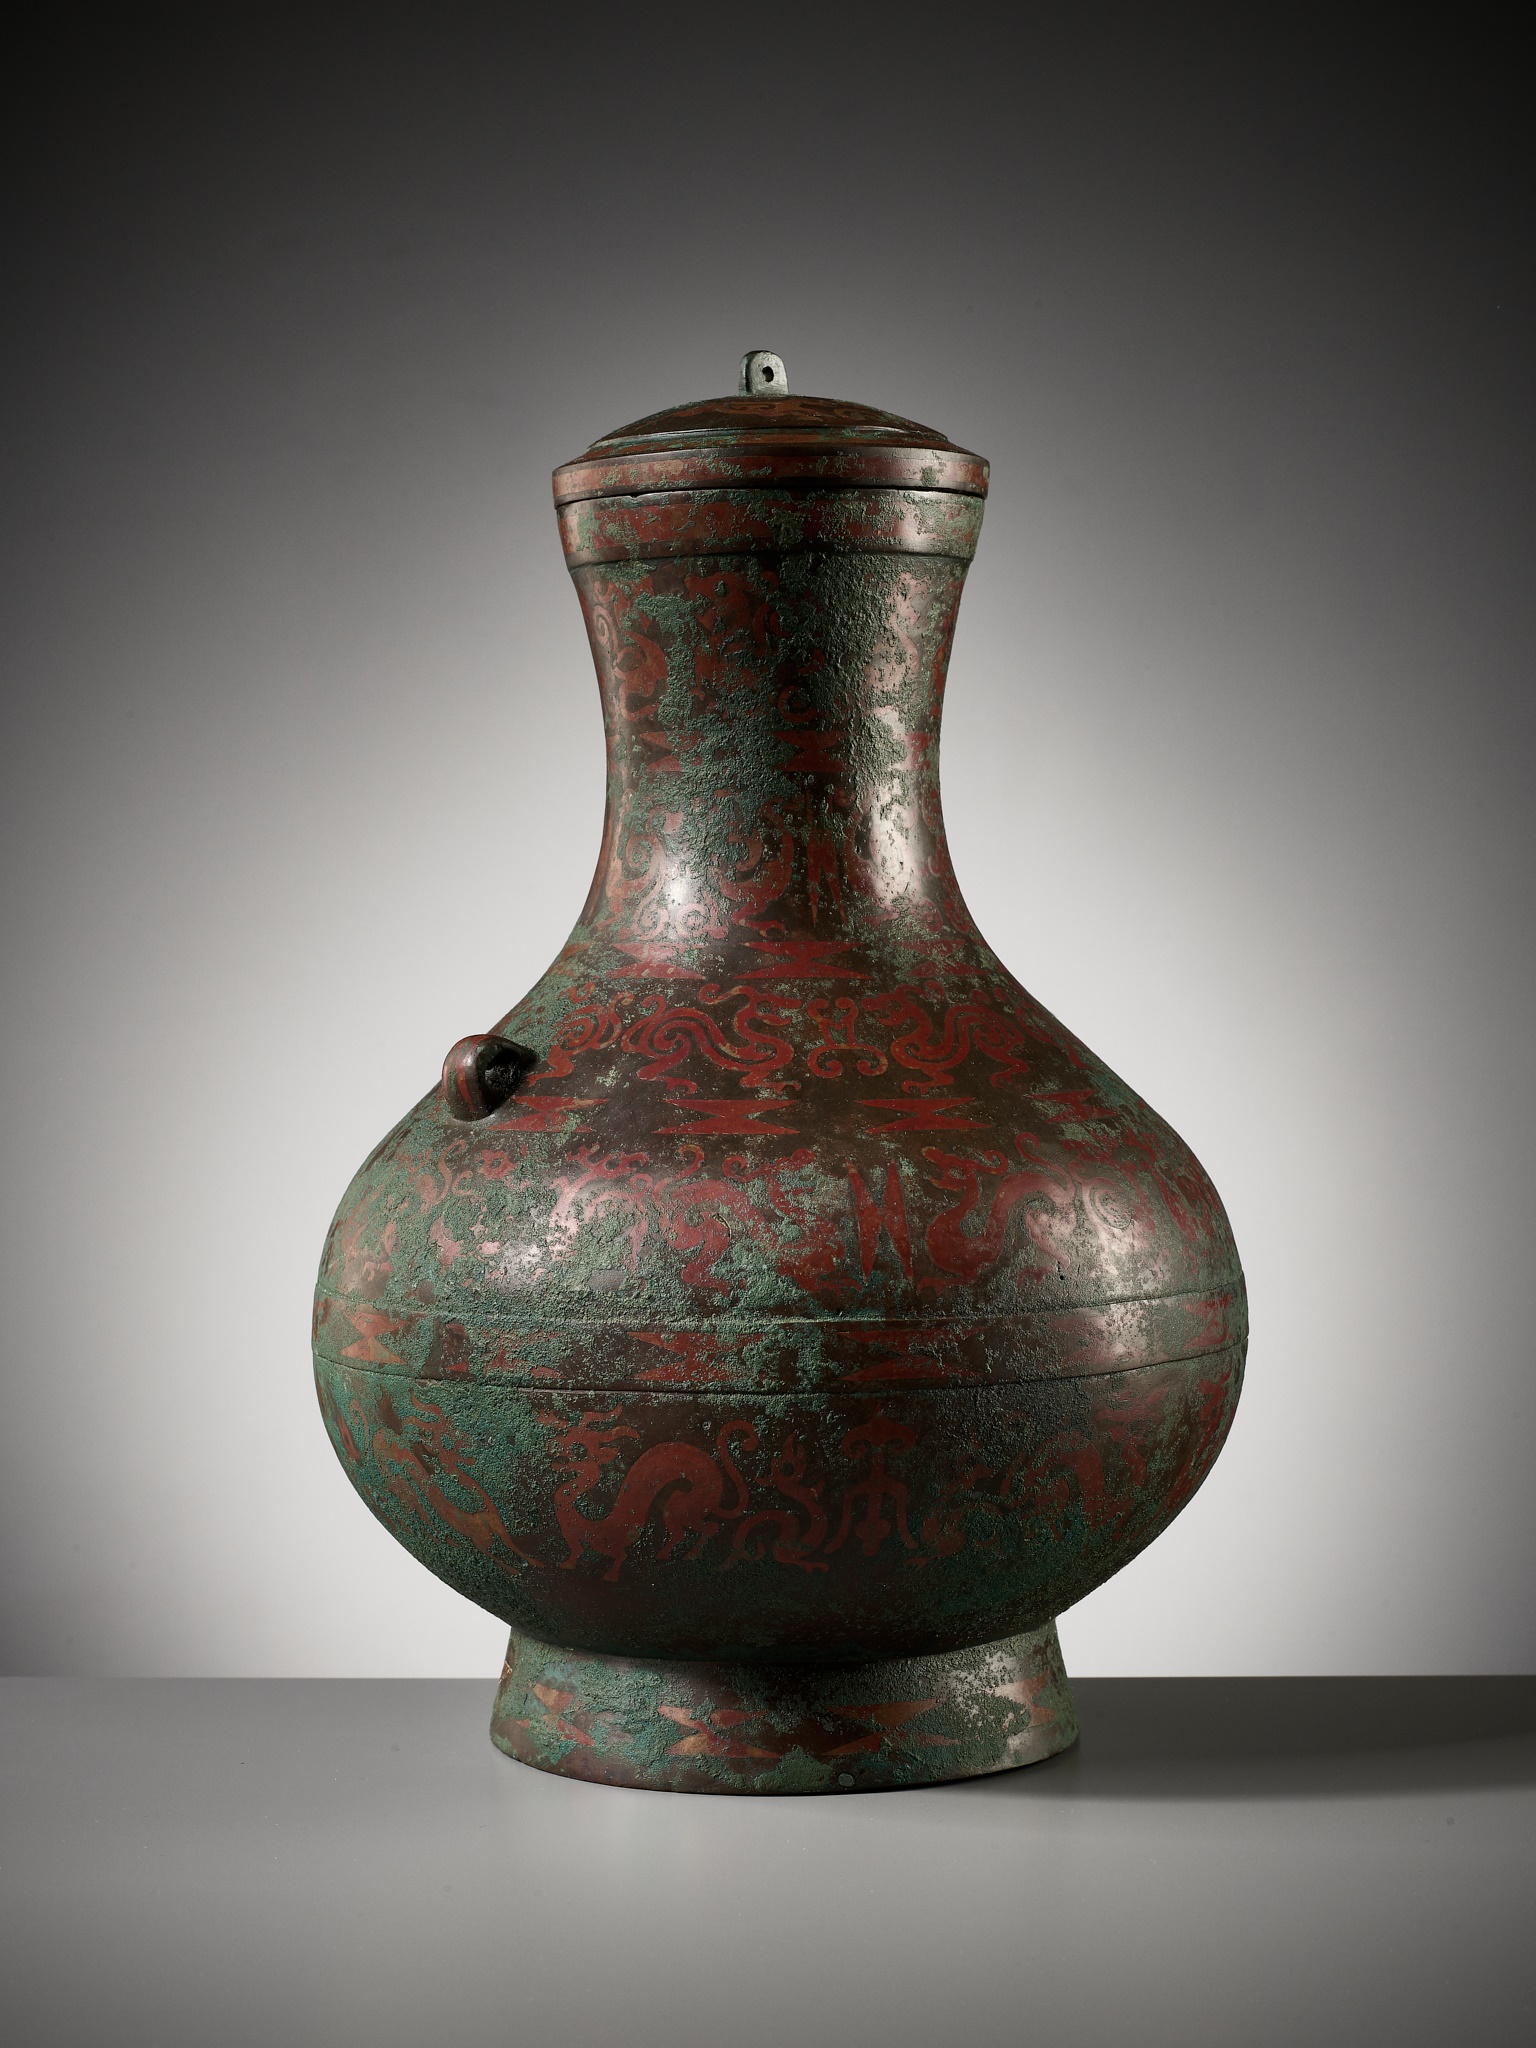 A COPPER-INLAID BRONZE RITUAL WINE VESSEL AND COVER, HU, EASTERN ZHOU DYNASTY - Image 12 of 27